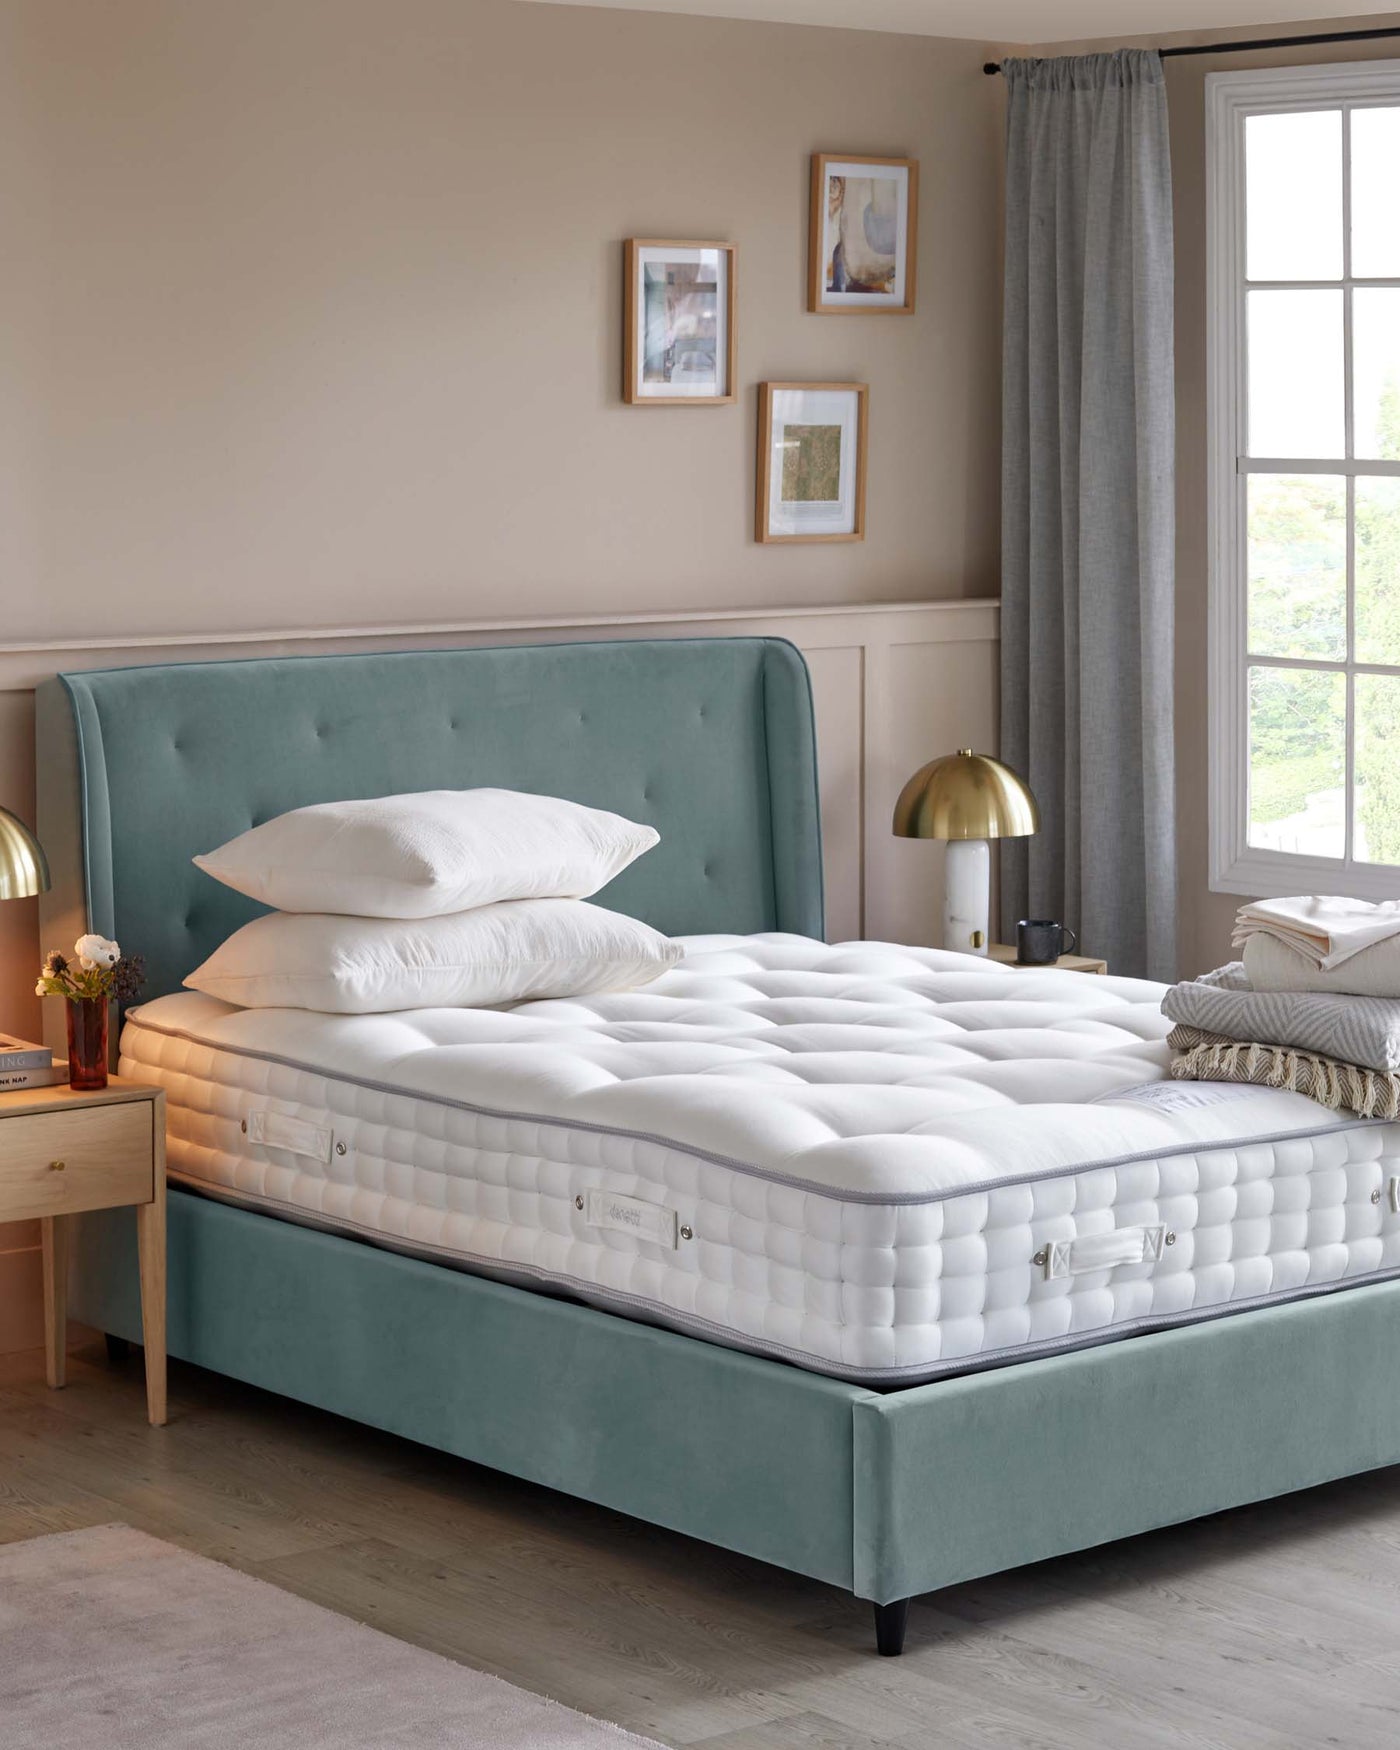 Elegant bedroom featuring a plush, teal upholstered bed frame with a high headboard and button detailing, complemented by a matching teal divan. The bed is dressed with crisp white bedding and soft pillows. Beside the bed is a minimalistic wooden nightstand with a drawer, accompanied by a contemporary brass table lamp with a glossy finish.